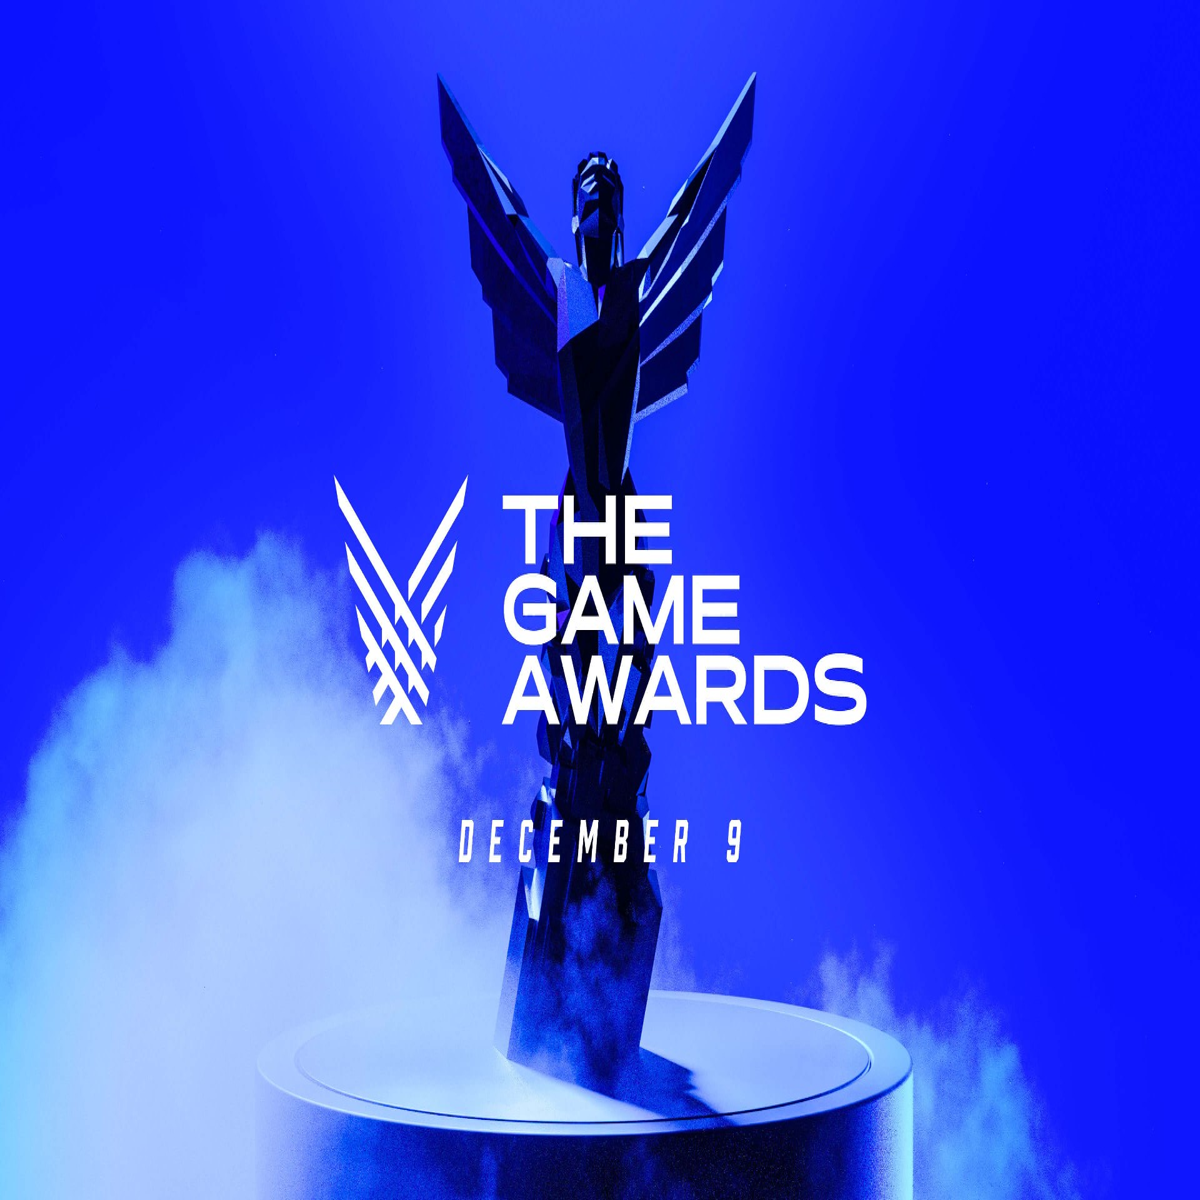 The Game Awards best fighting game nominees revealed though there's no love  outside of their own category